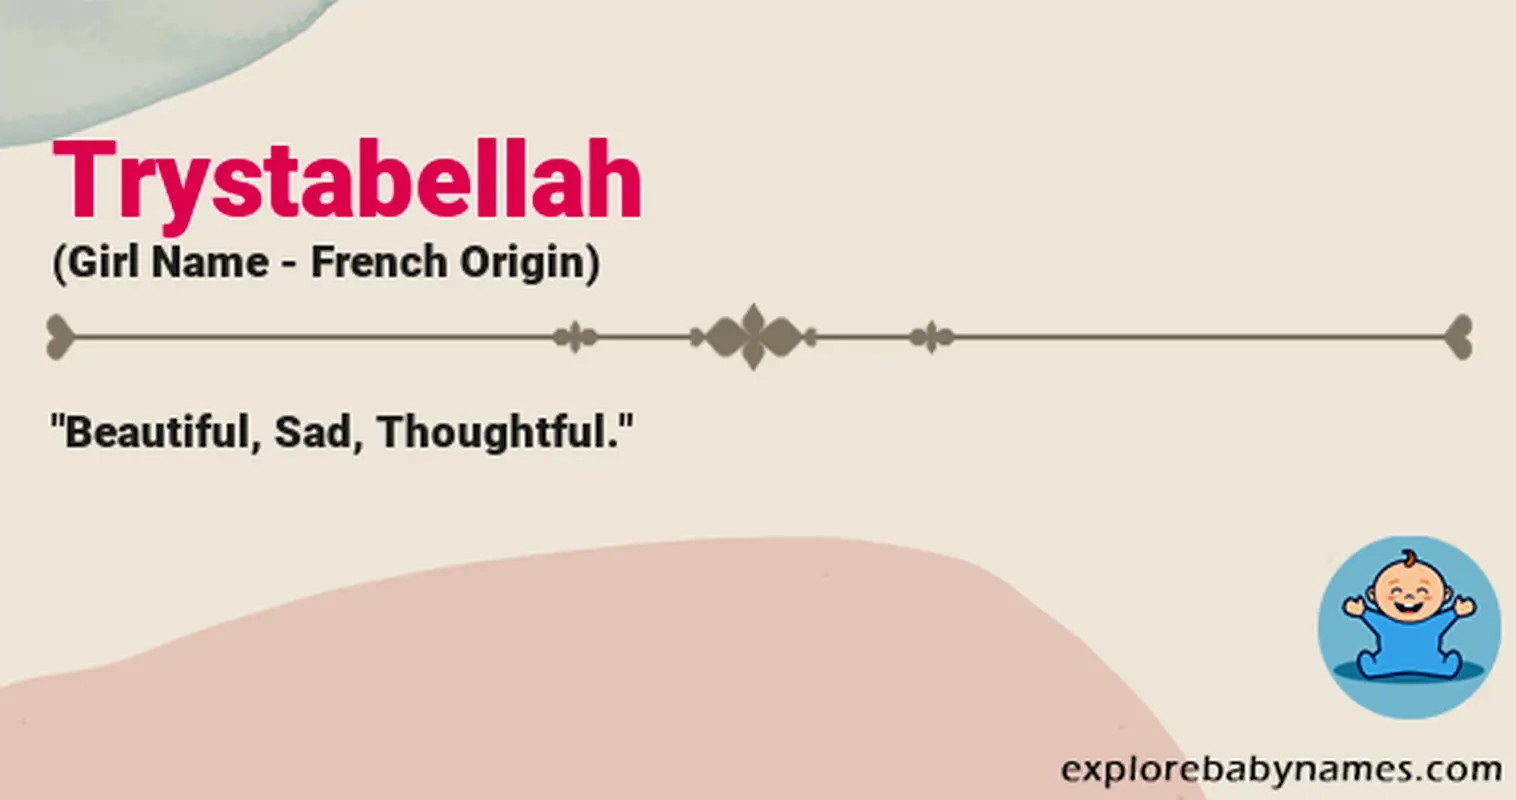 Meaning of Trystabellah